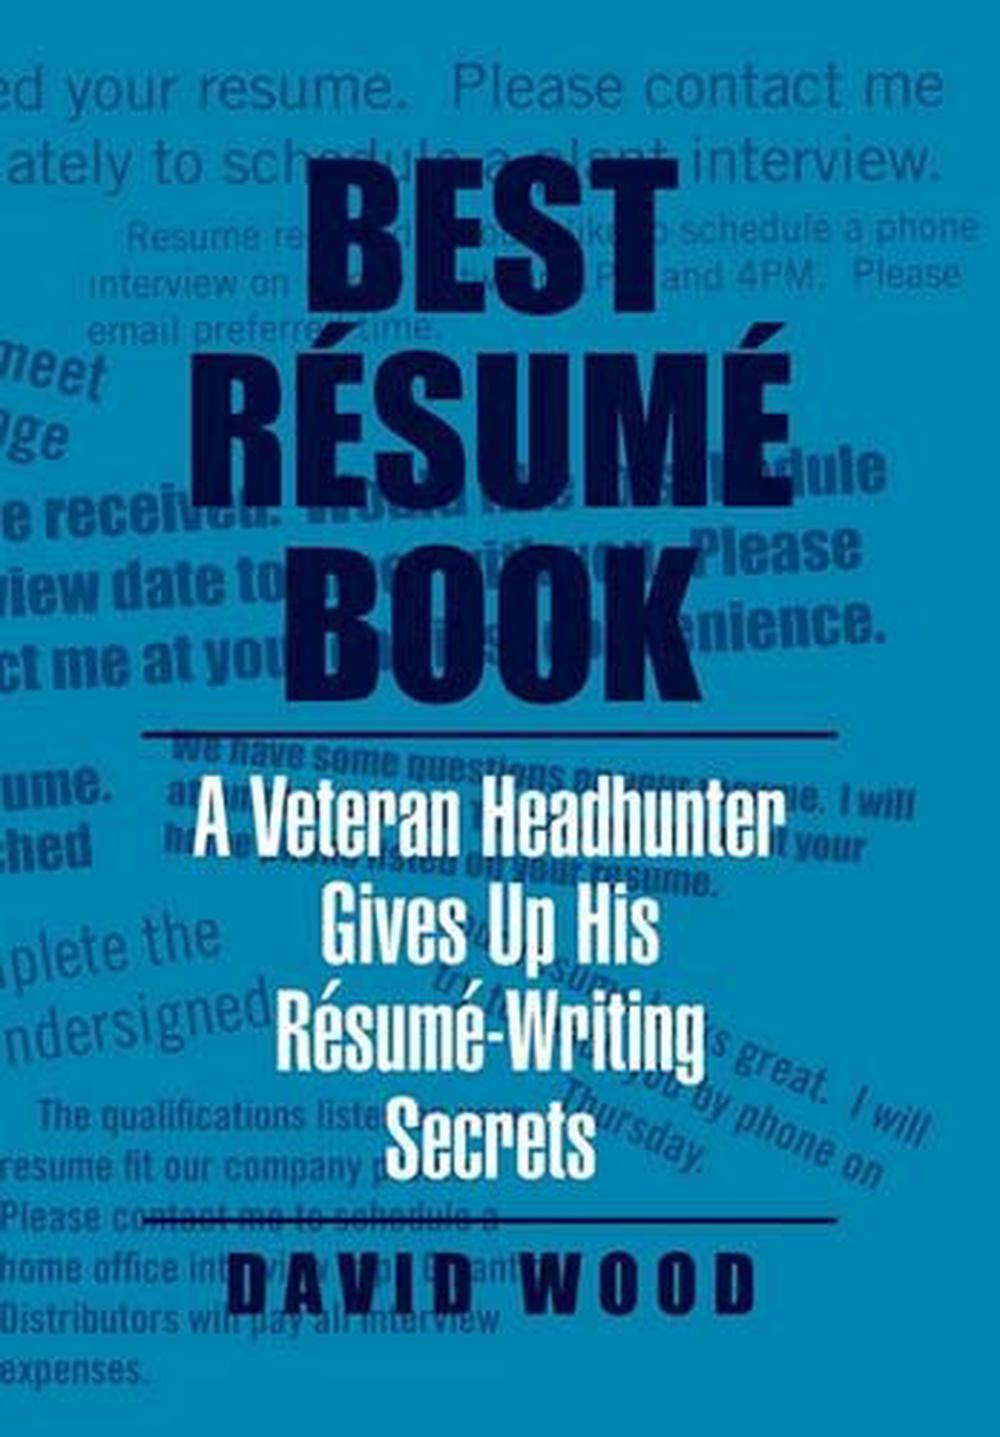 Best Resume Book by David Wood (English) Hardcover Book Free Shipping